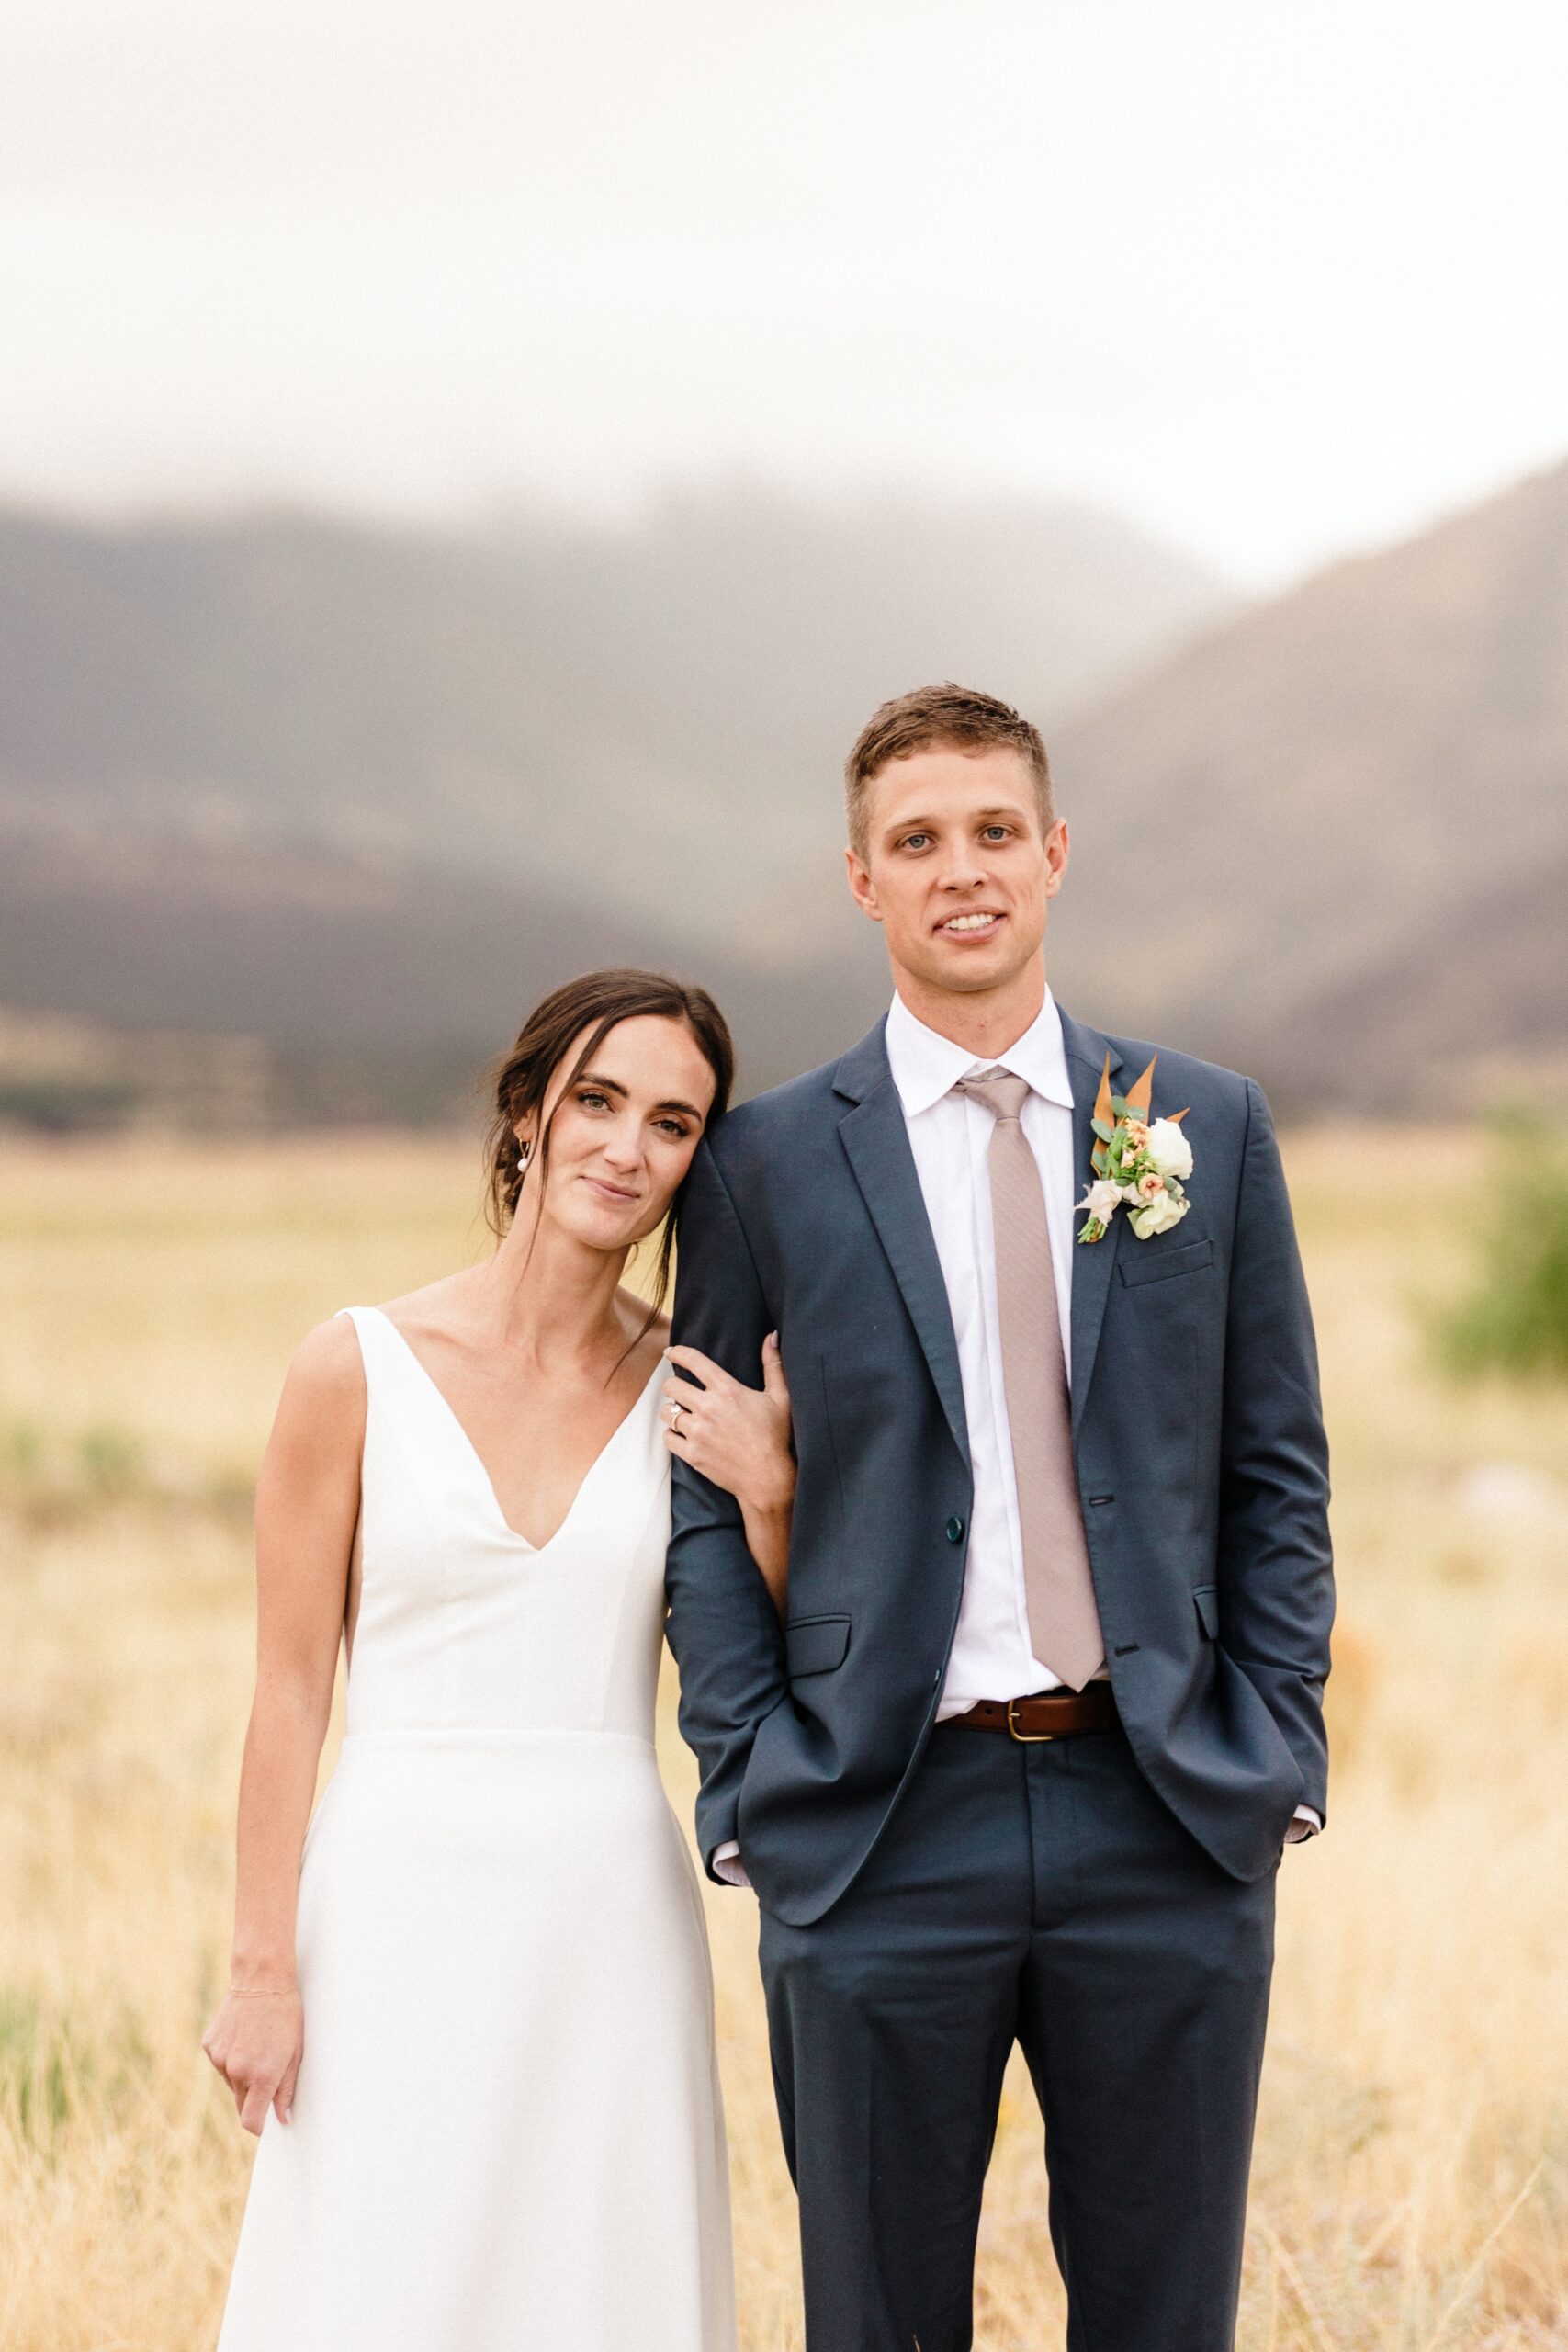 Bride leaning her head against groom's shoulder while standing in a field